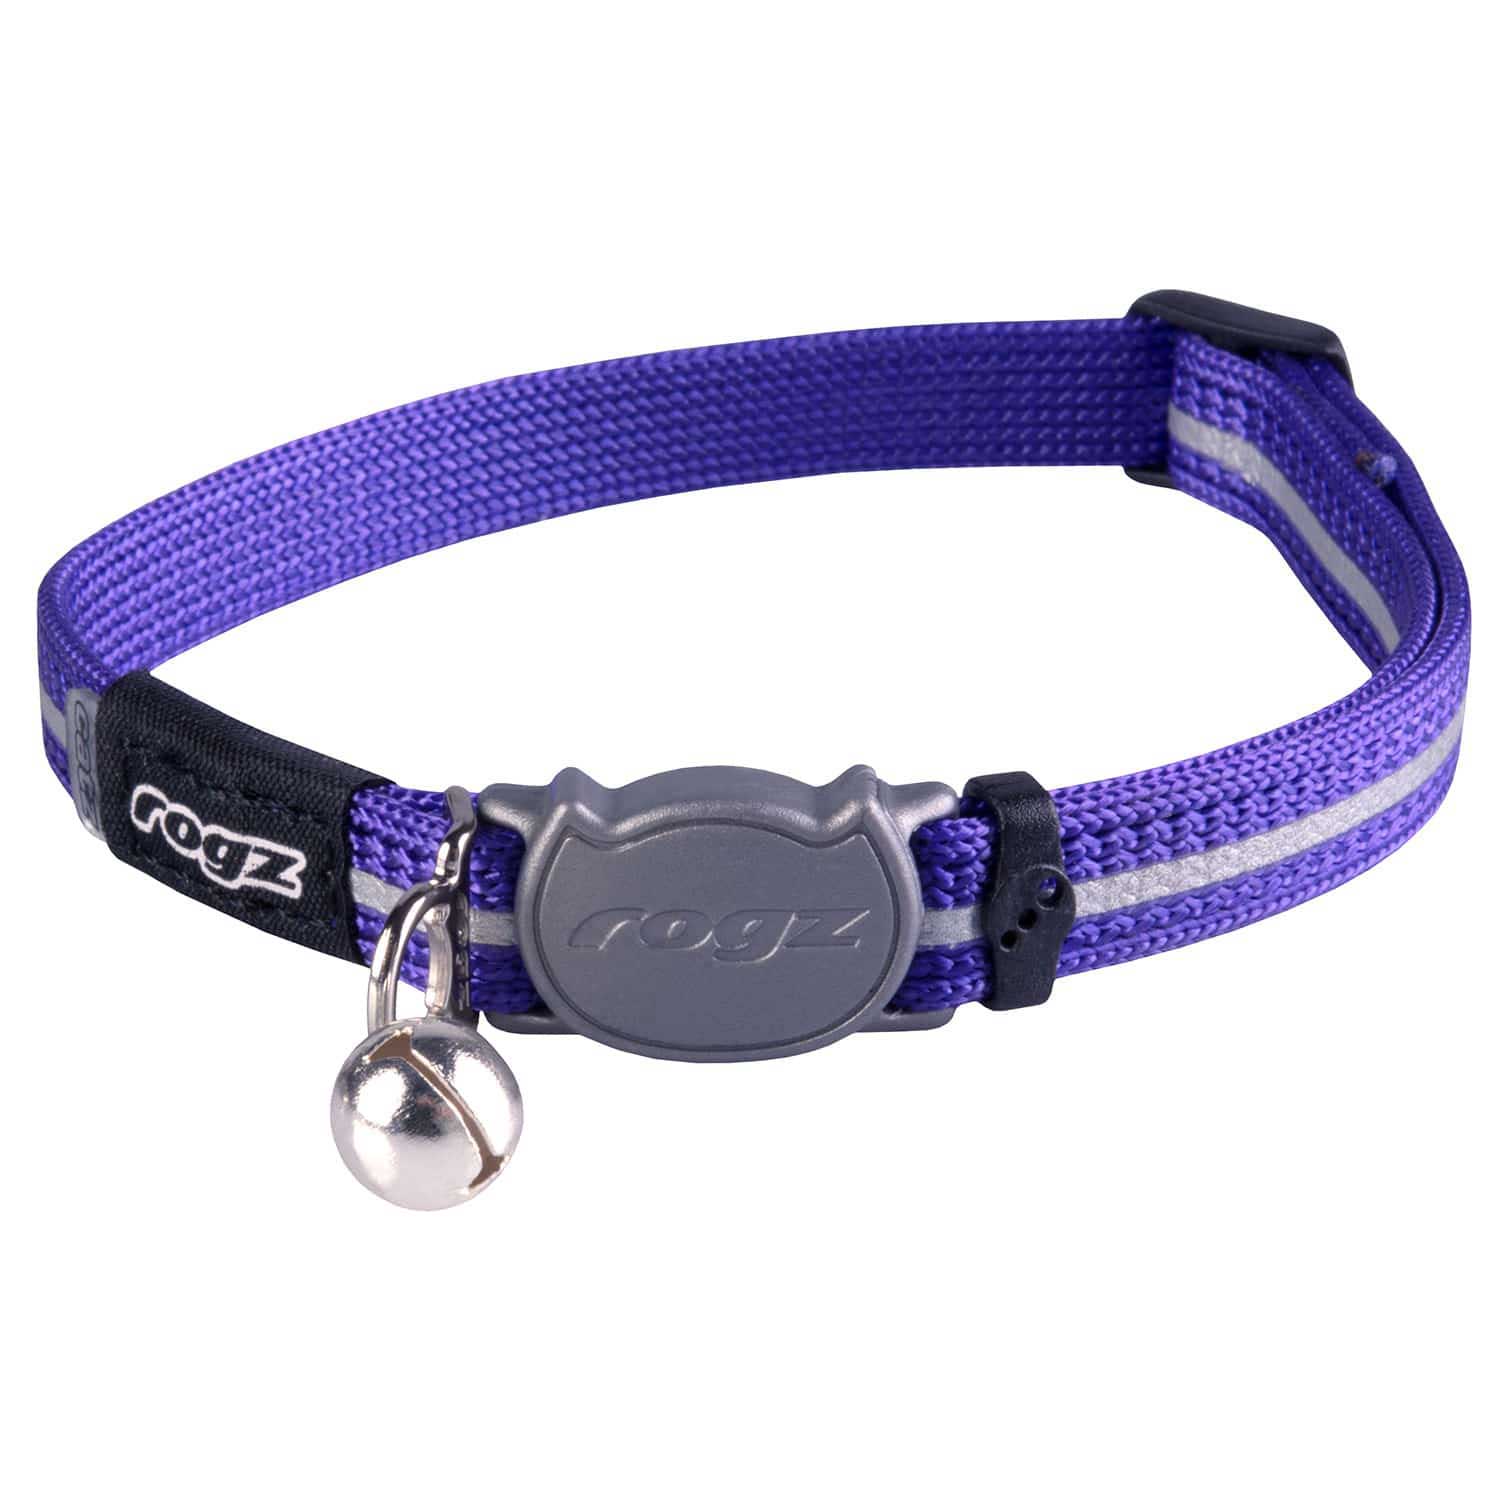 Rogz Alleycat Cat Safety Release Collar